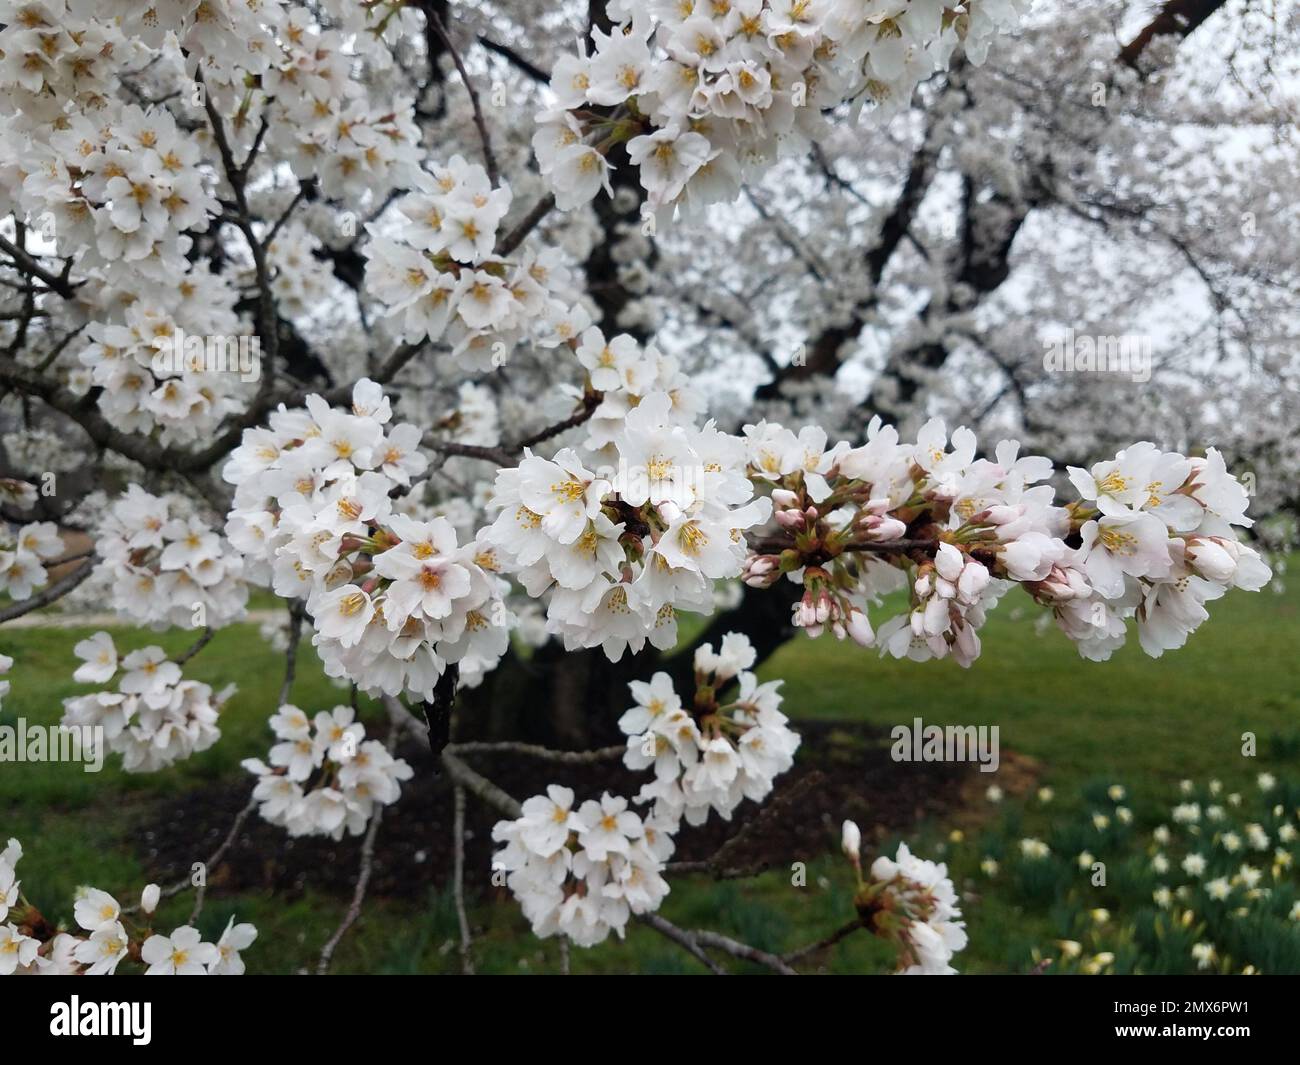 tree blooming with white cherry blossoms outdoor with green grass. Stock Photo